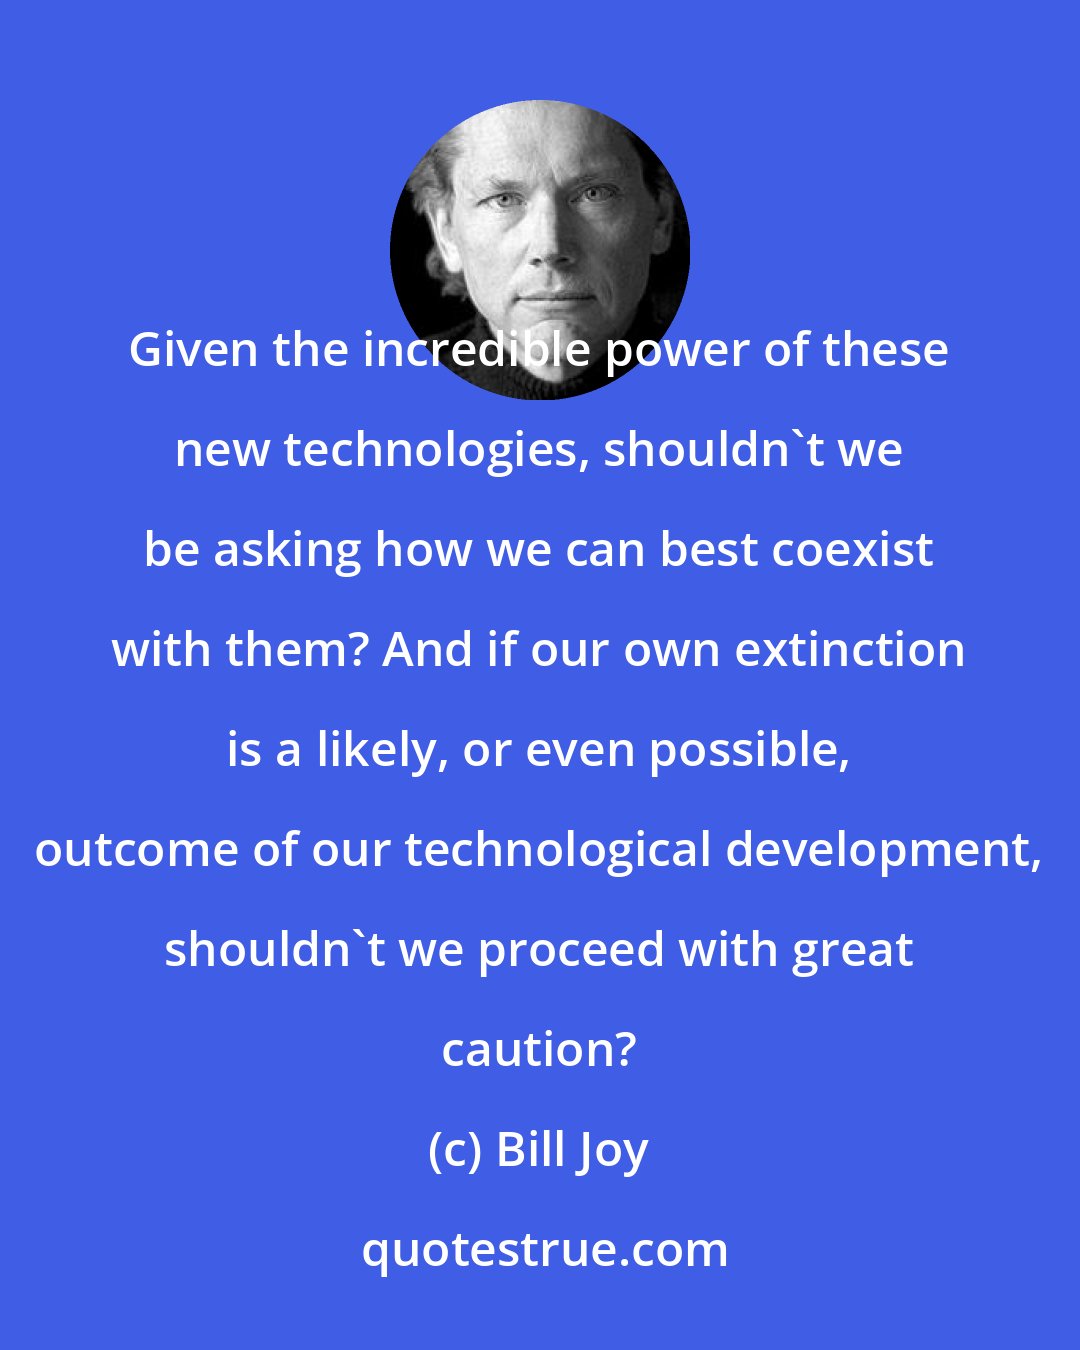 Bill Joy: Given the incredible power of these new technologies, shouldn't we be asking how we can best coexist with them? And if our own extinction is a likely, or even possible, outcome of our technological development, shouldn't we proceed with great caution?